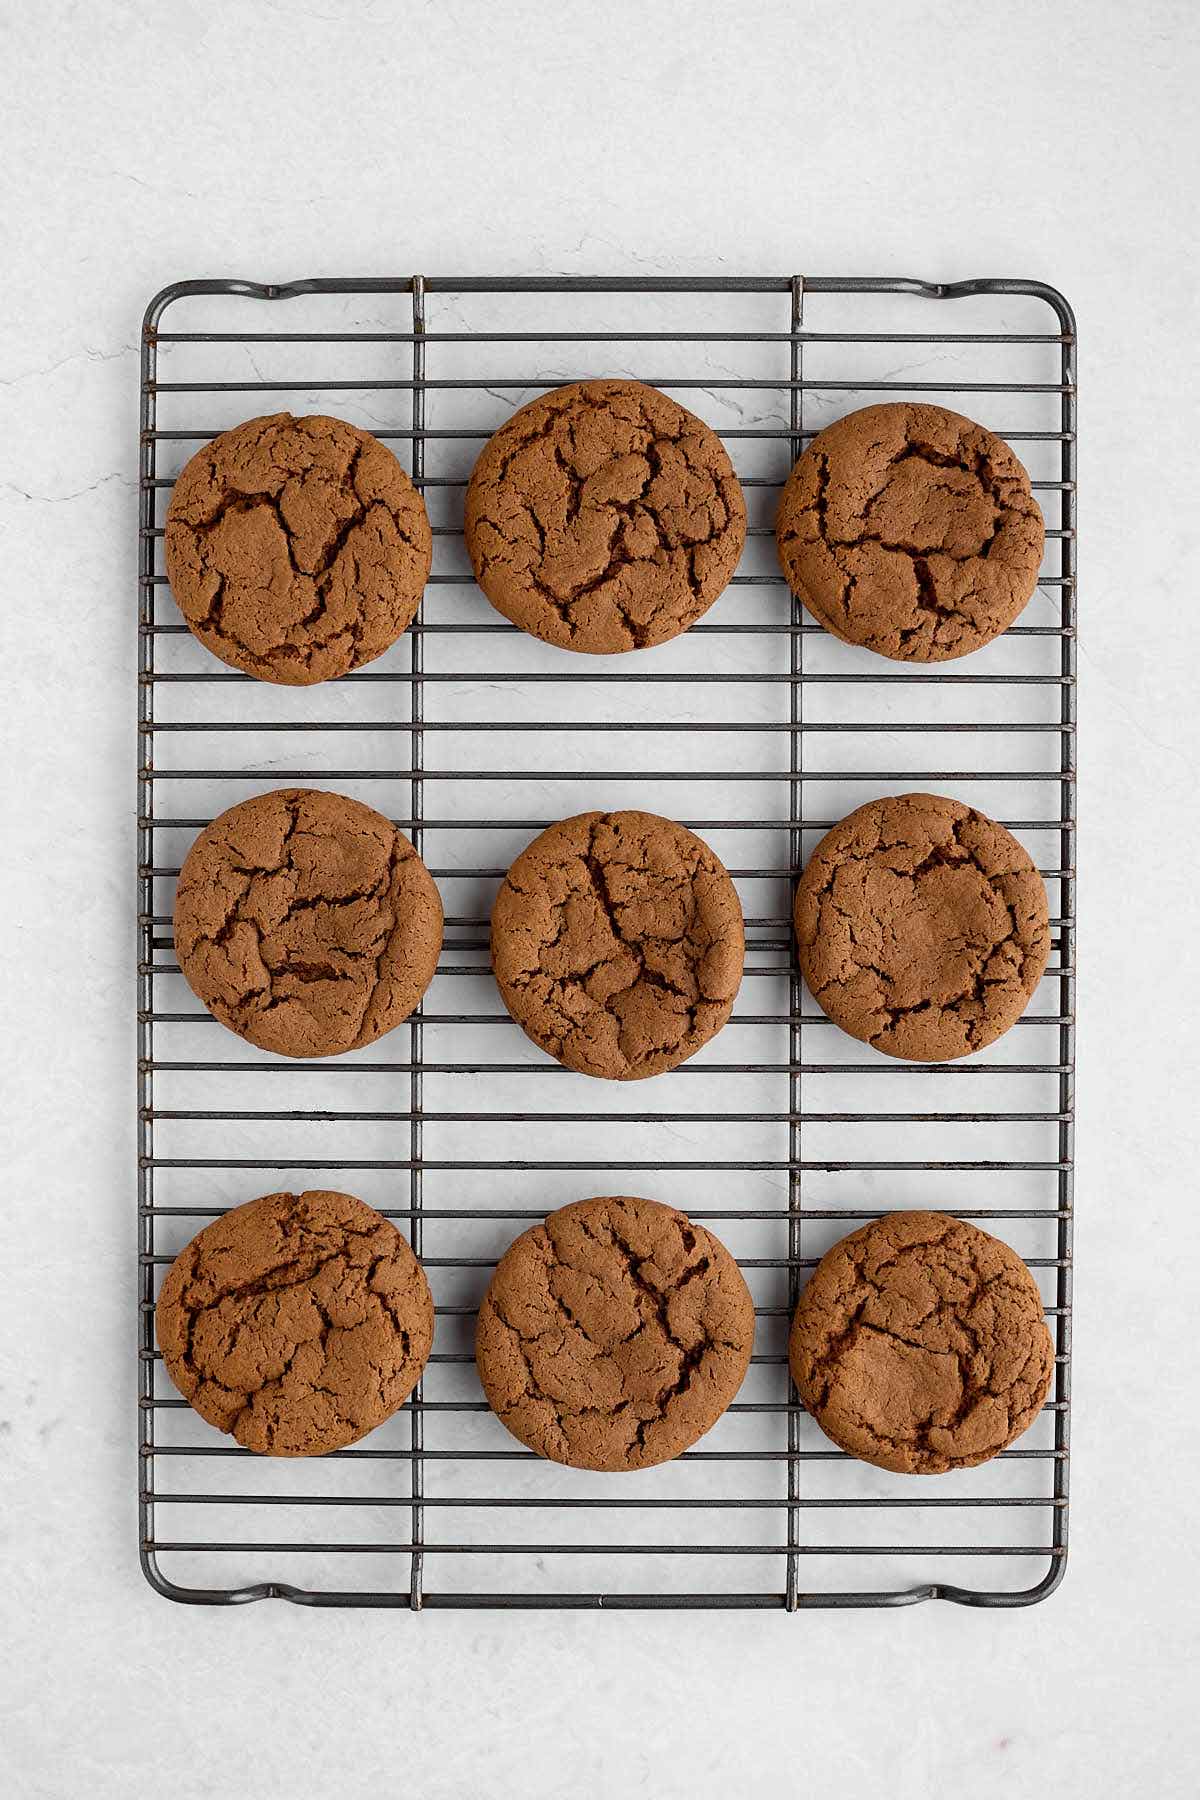 Cooling rack with baked German chocolate cookies.